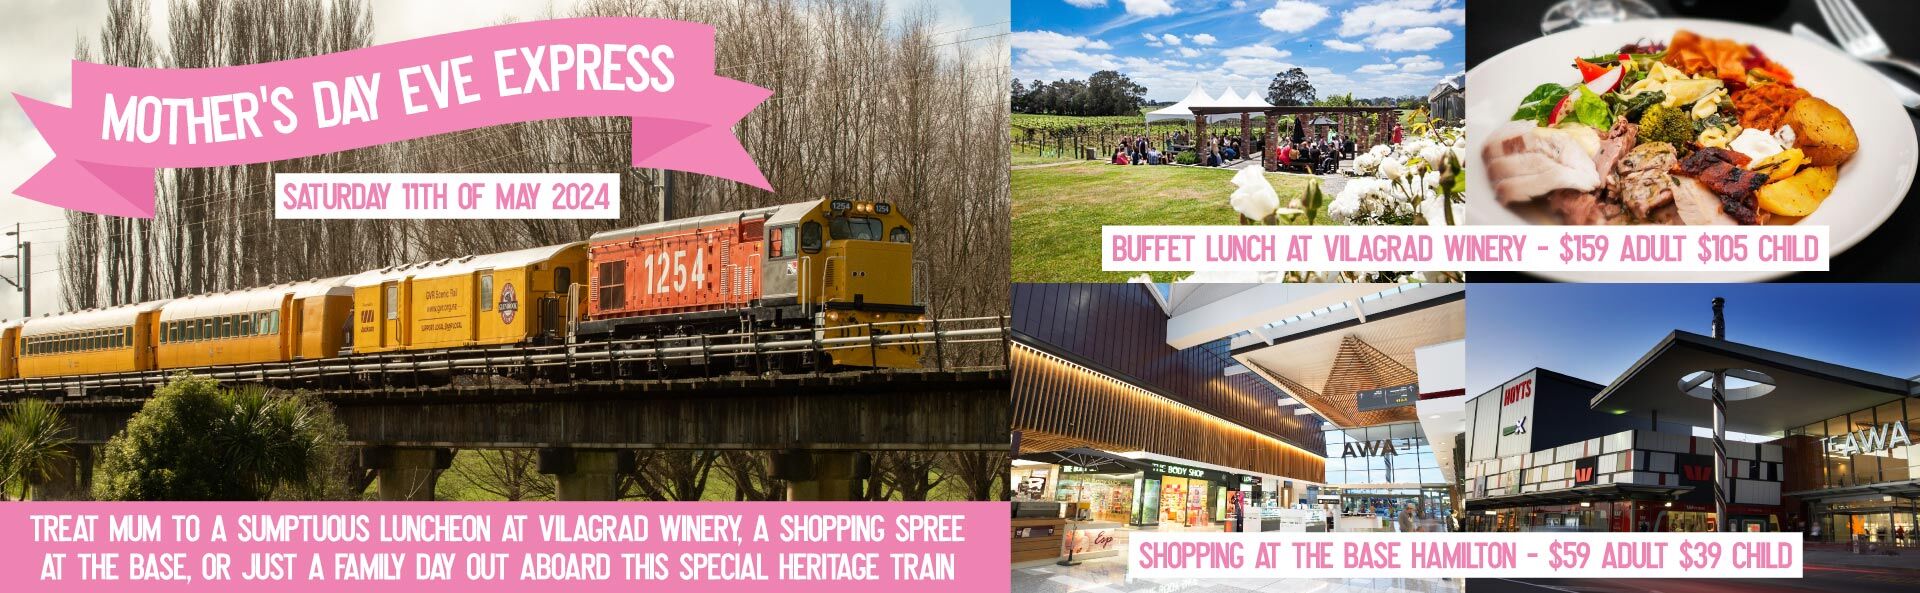 Treat mum to a sumptuous luncheon at Vilagrad Winery, a shopping spree at the Base, or just a family day out aboard this special heritage train journey from Waiuku/Glenbrook.